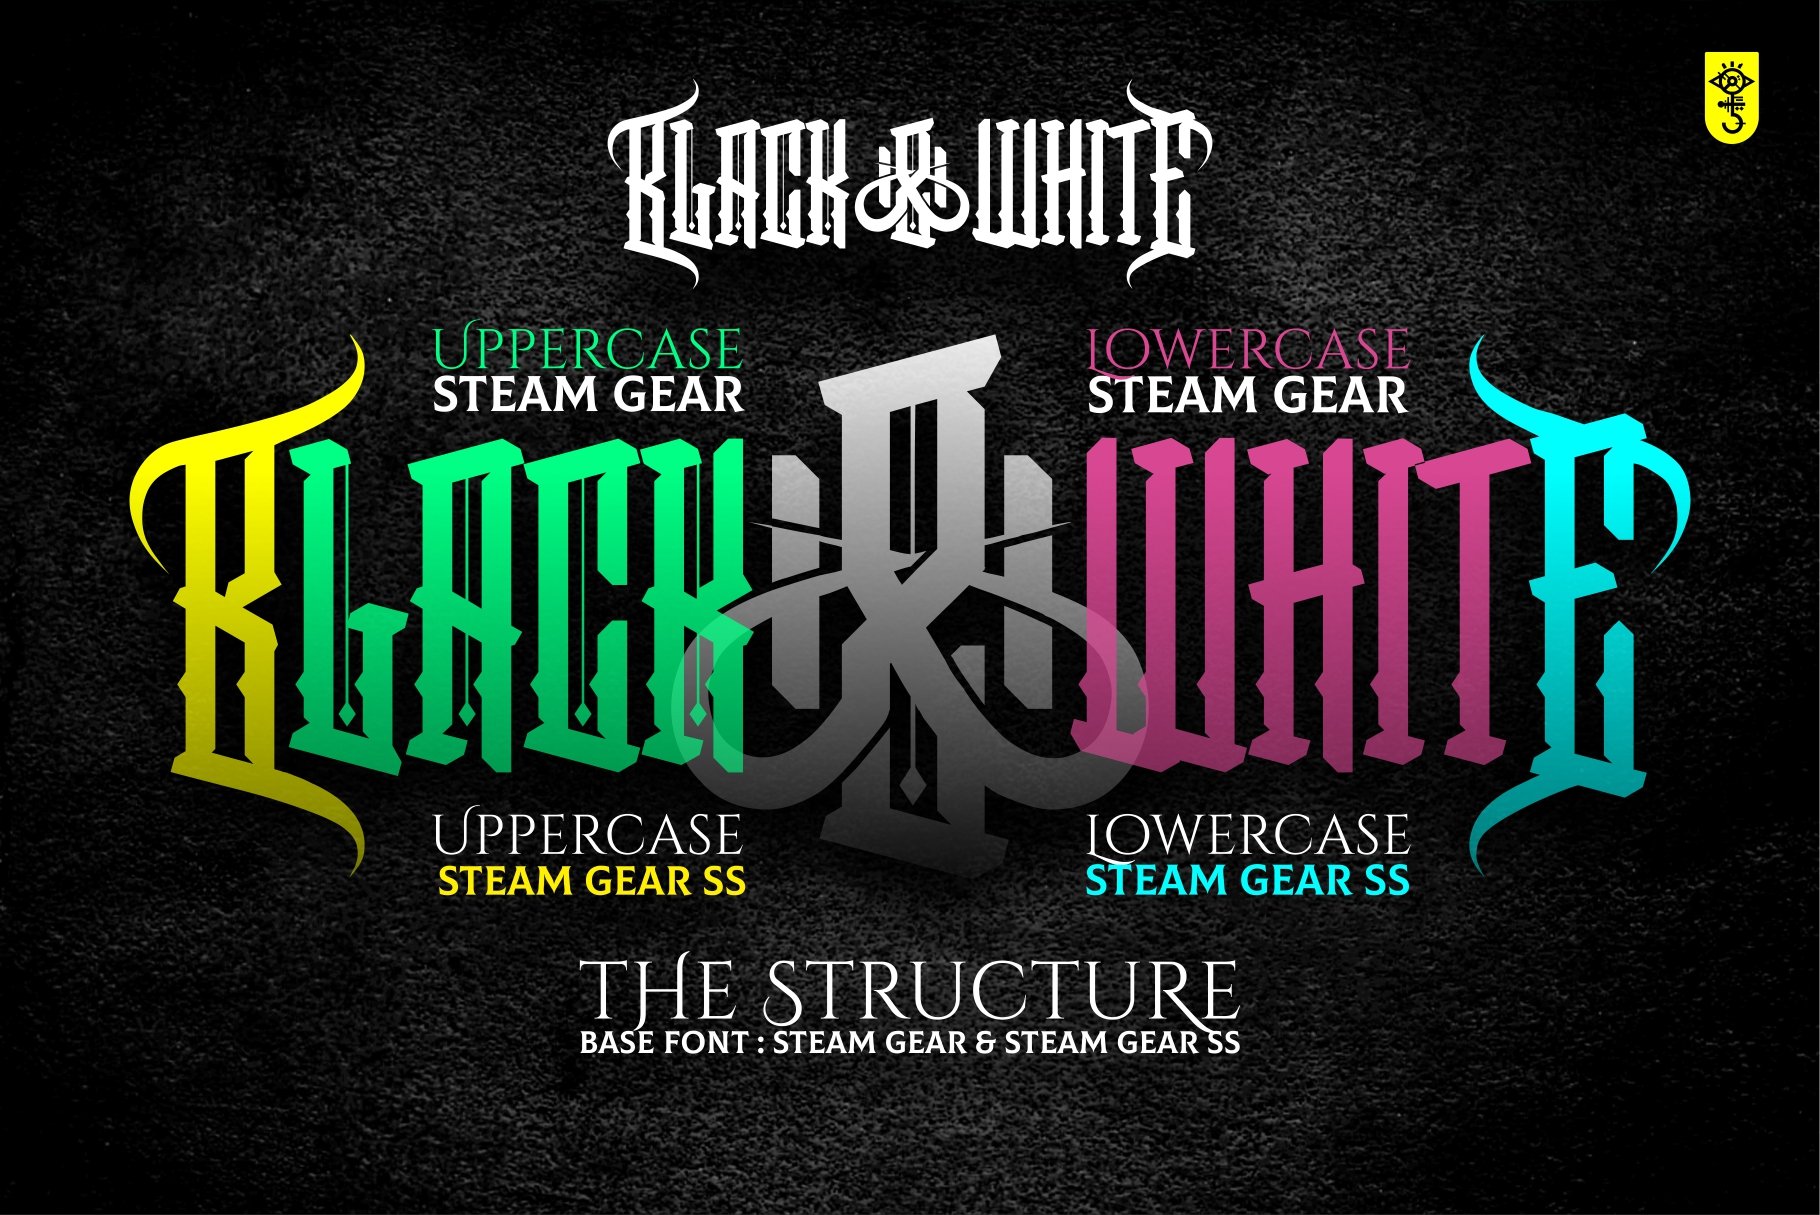 Steam Gear (Duo Font) SS cover image.